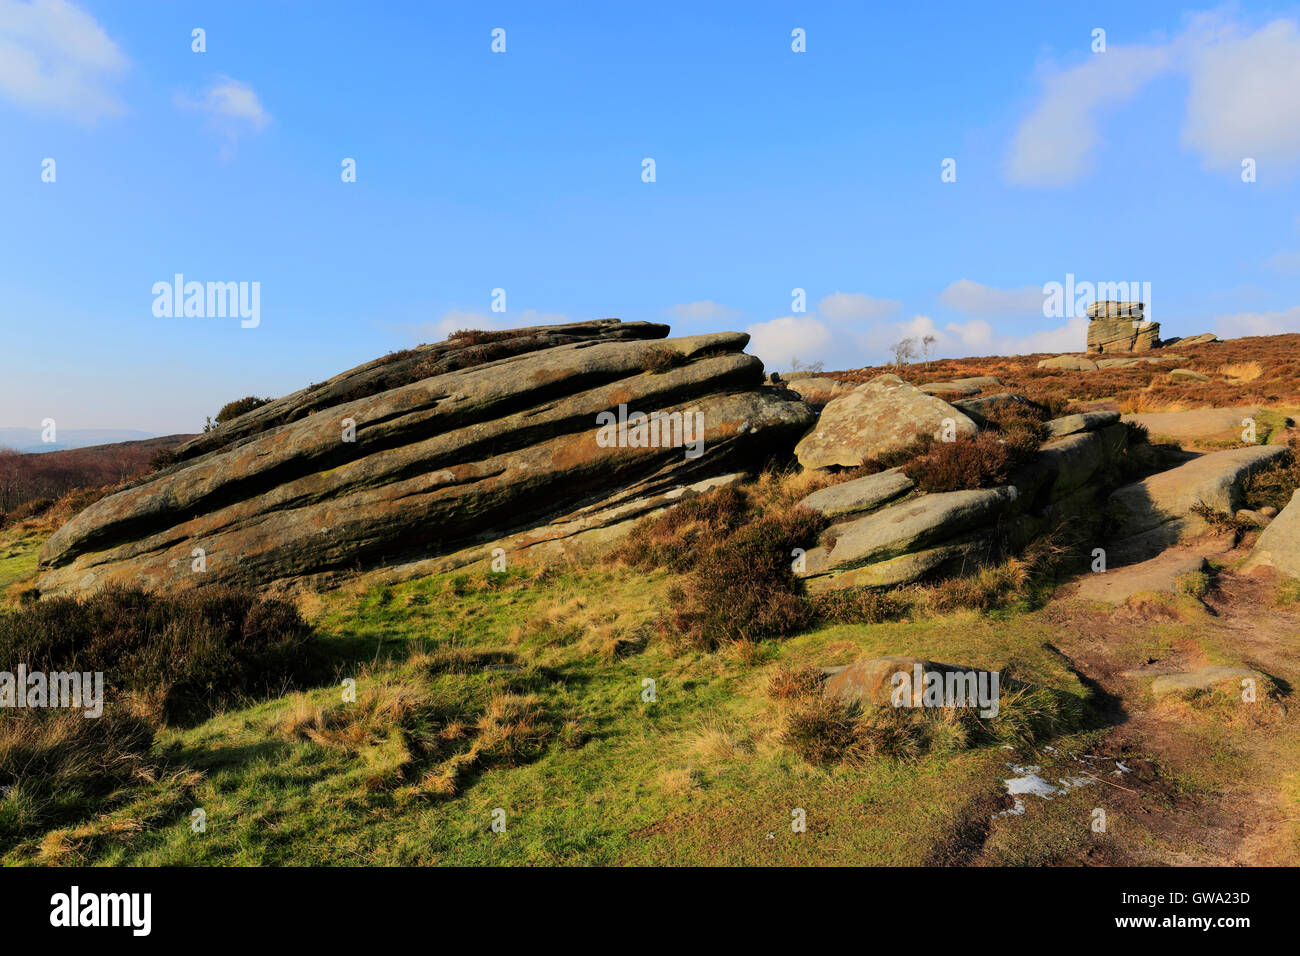 View of the Mother Cap Gritstone rock formation, Millstone Edge, Derbyshire County; Peak District National Park; England; UK Stock Photo